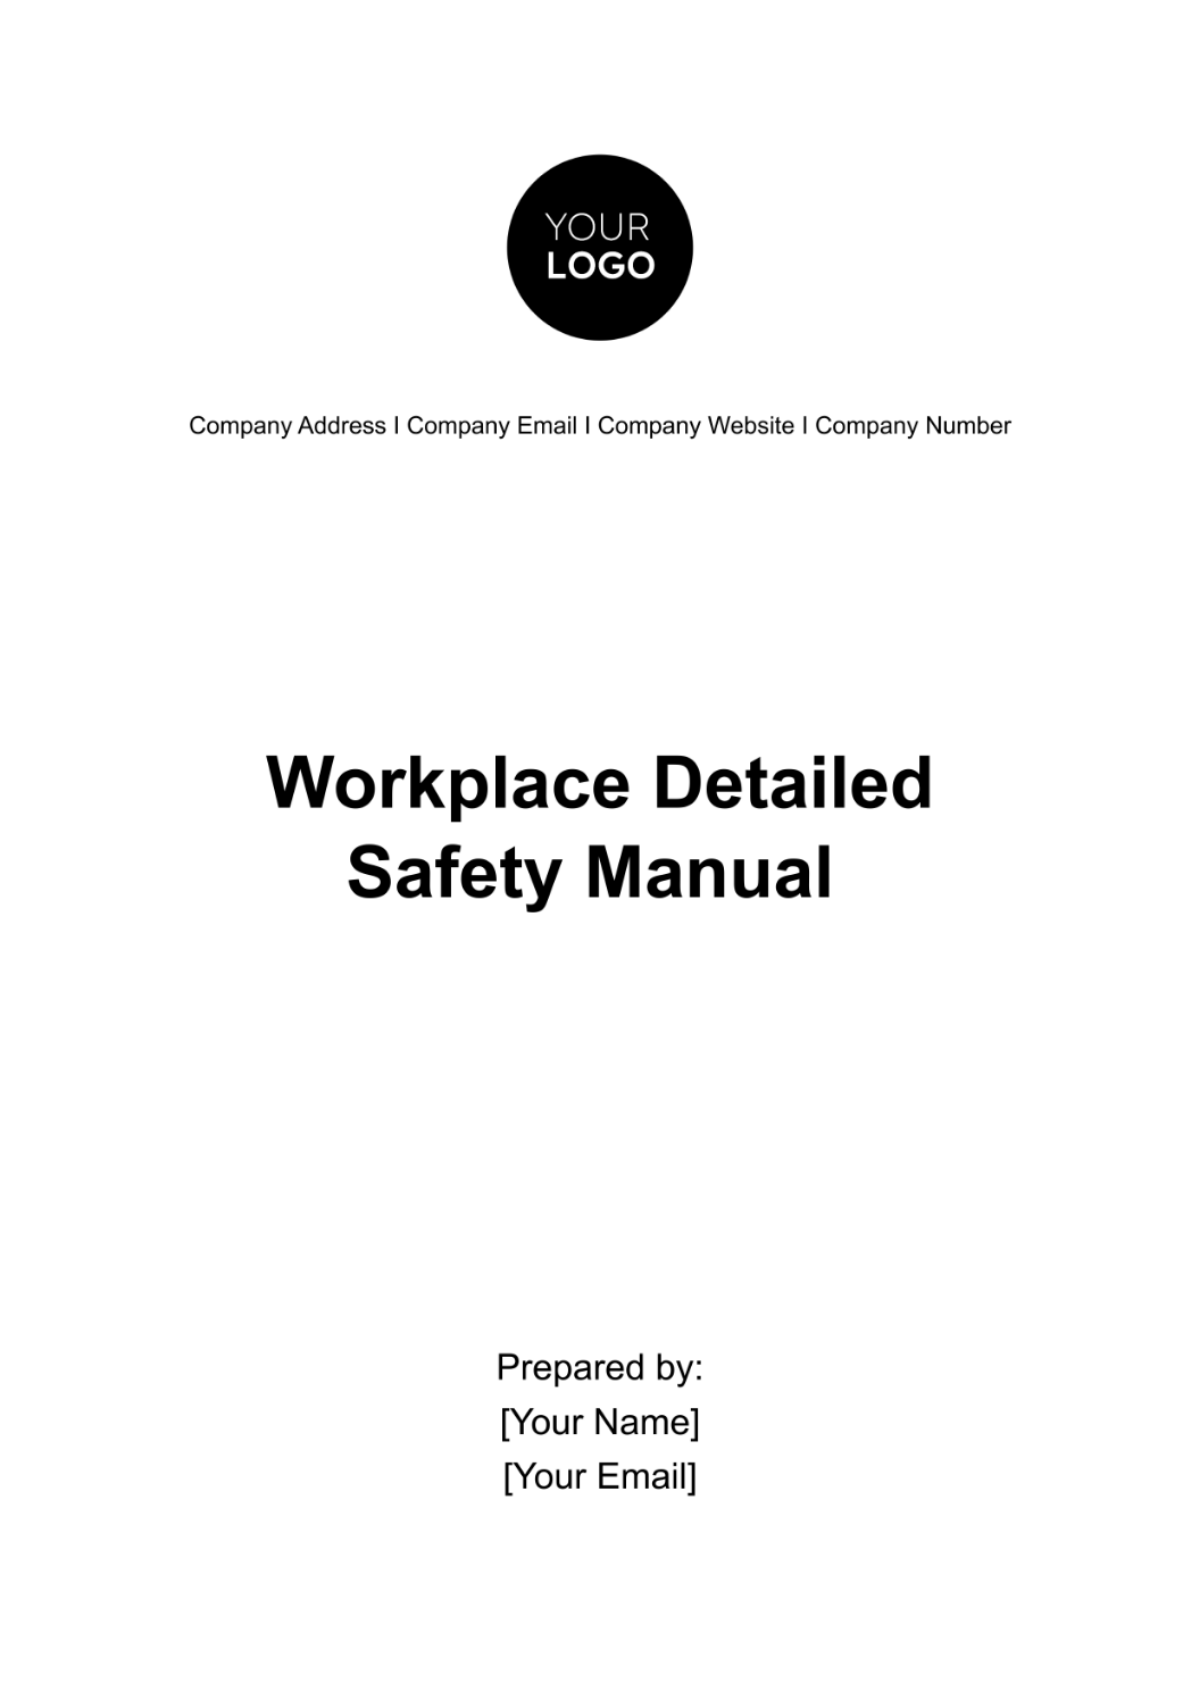 Free Workplace Detailed Safety Manual Template